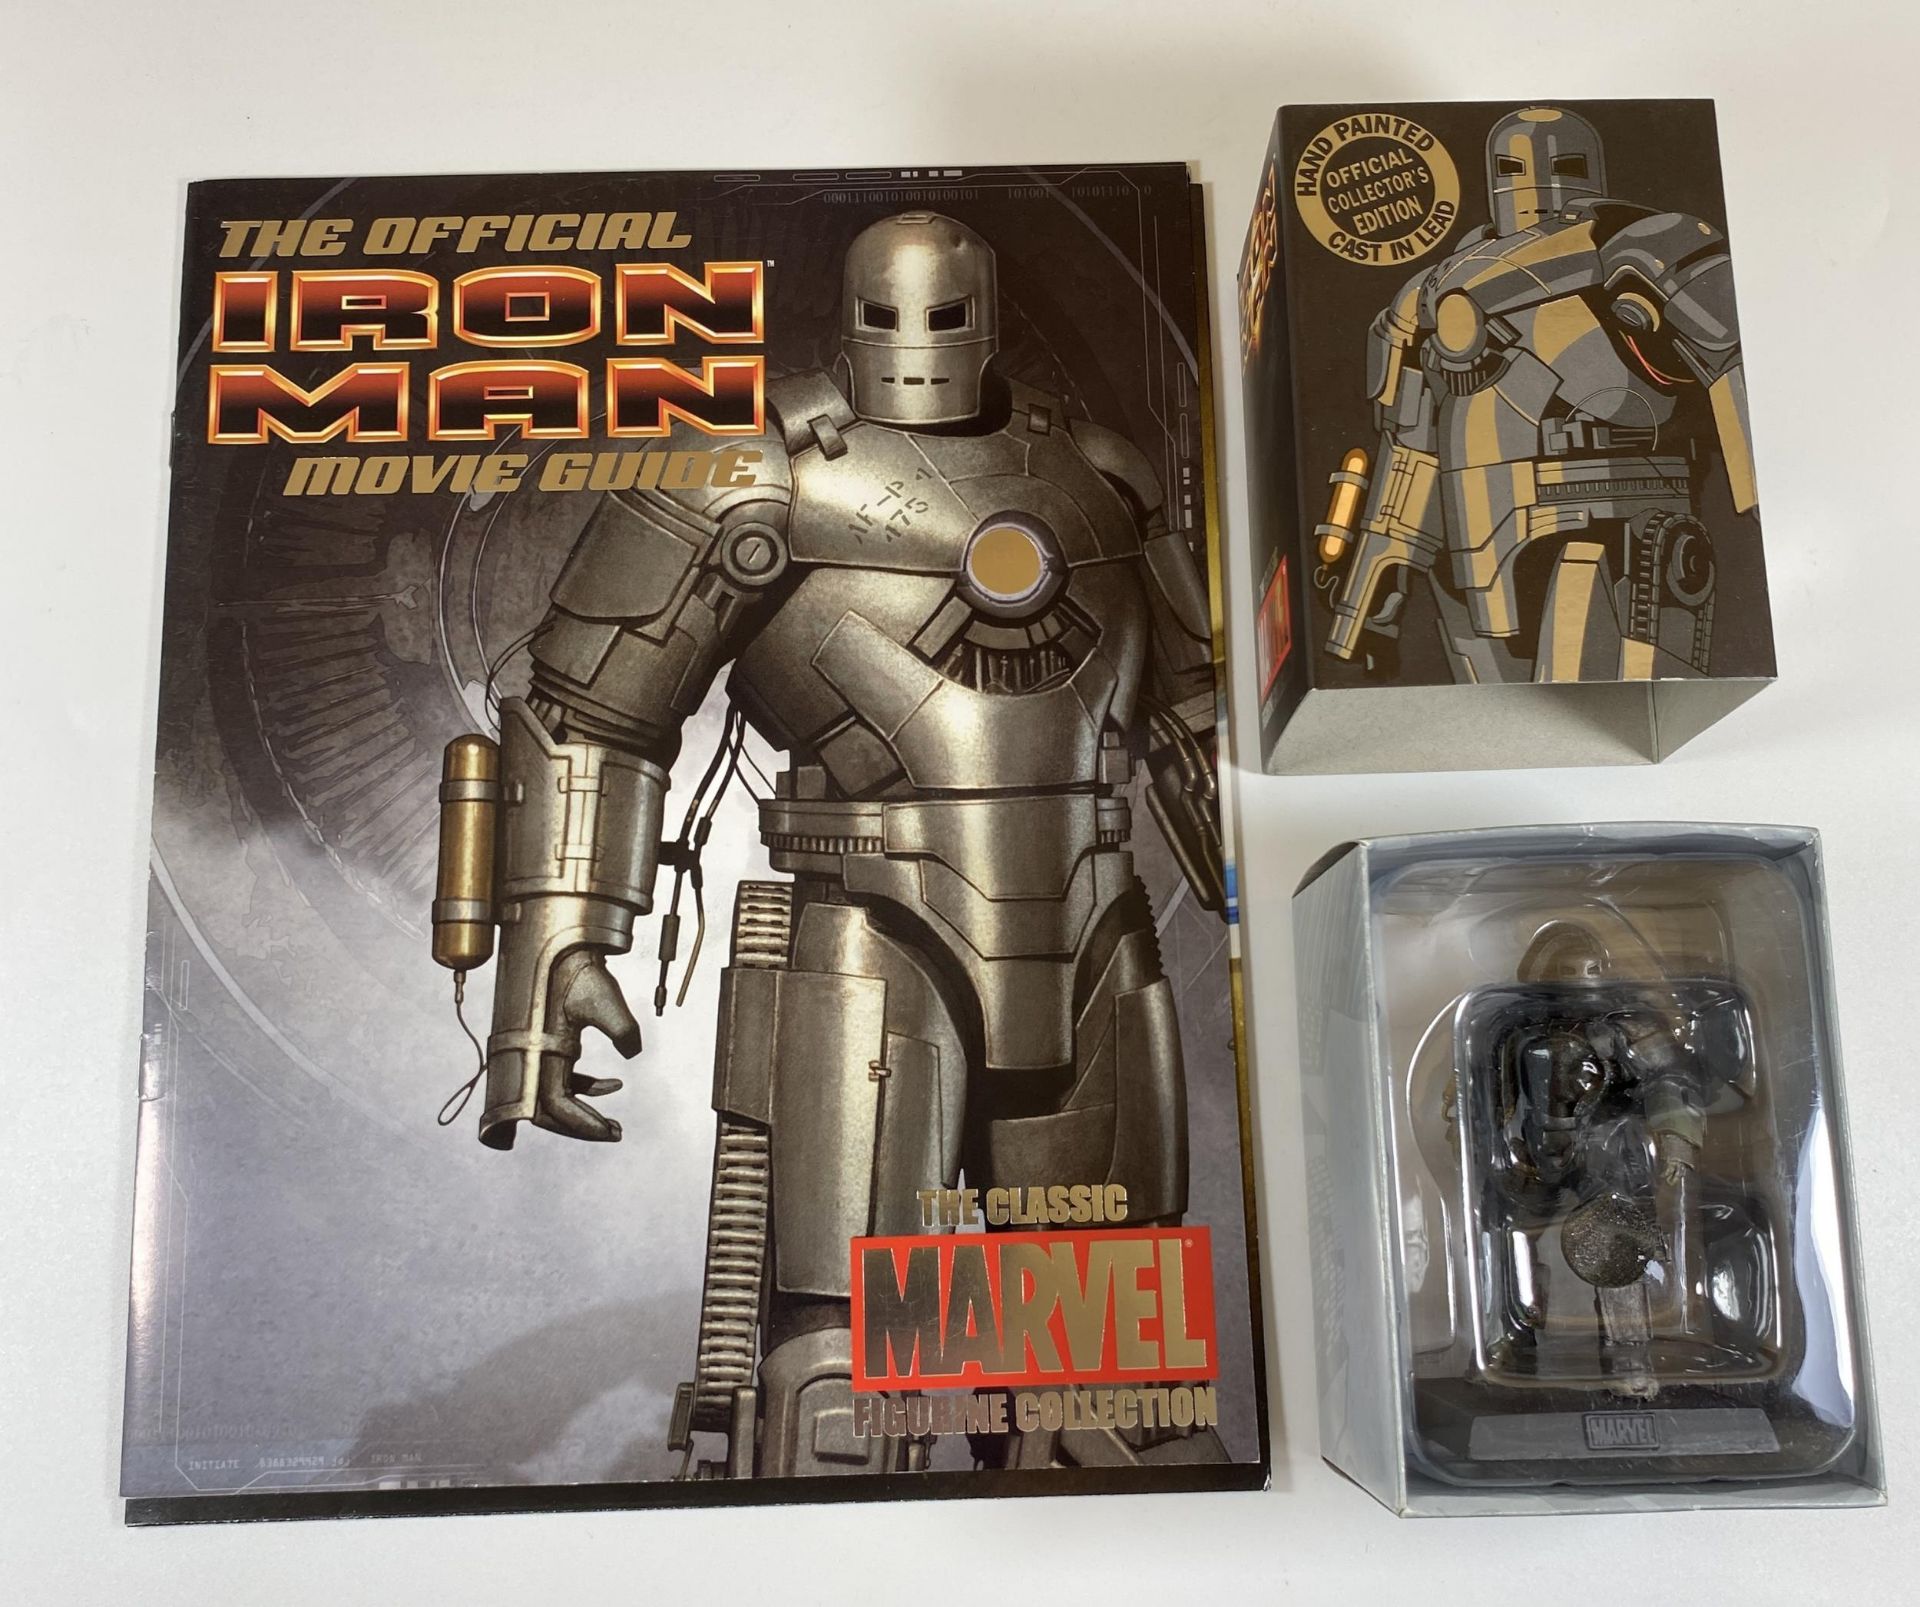 A BOXED THE CLASSIC MARVEL COLLECTION SPECIAL FIGURE - 'IRON MAN MK1' , WITH MAGAZINE